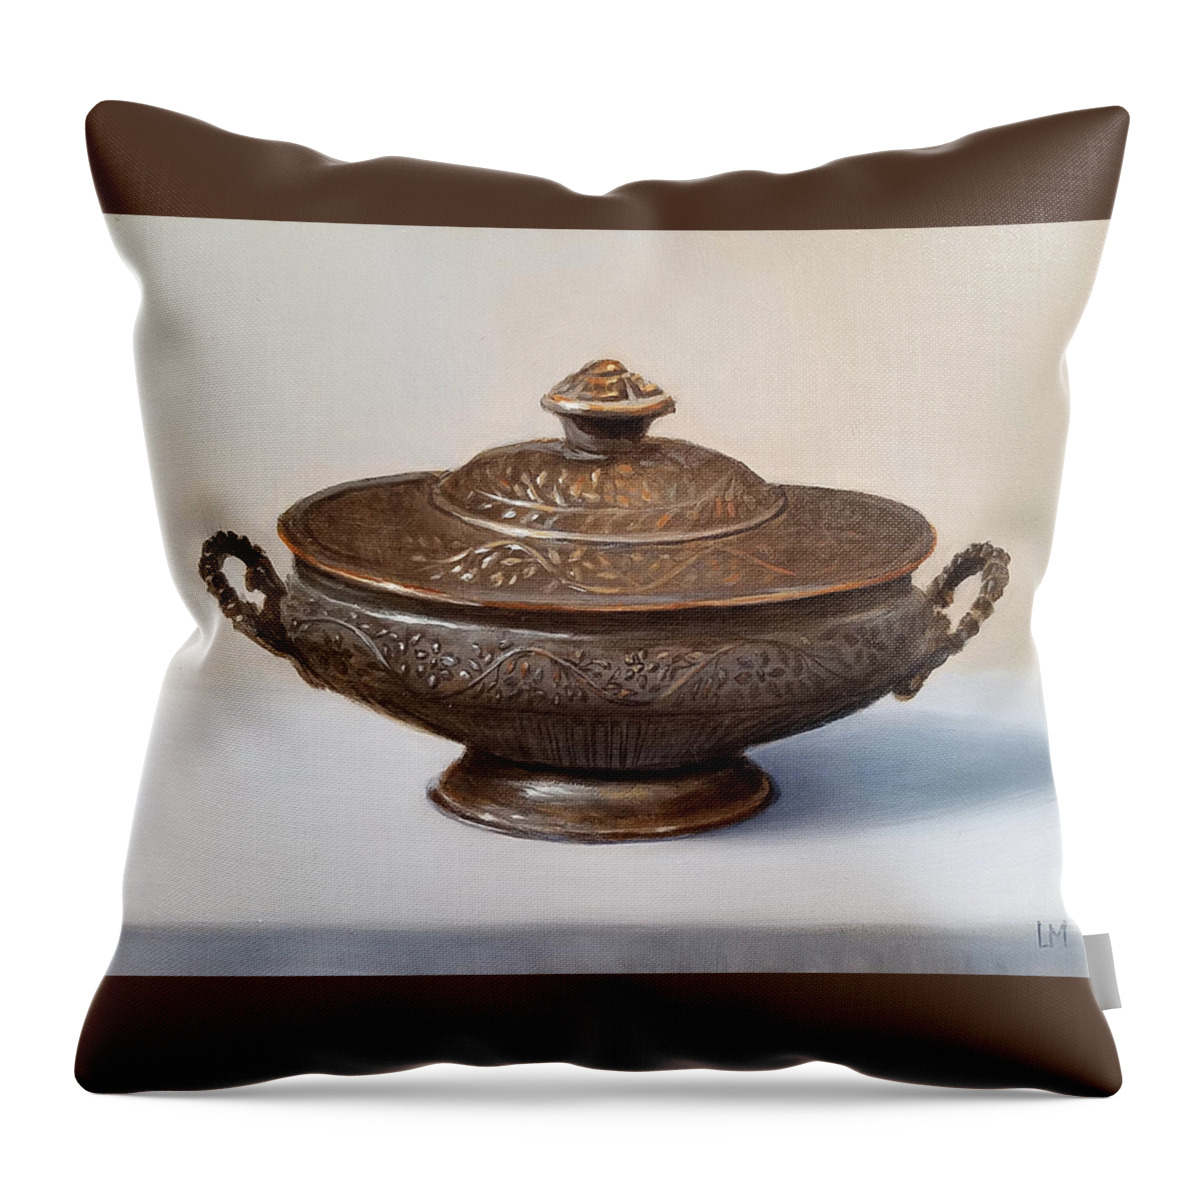 Oil Throw Pillow featuring the painting Copper Vessel by Linda Merchant